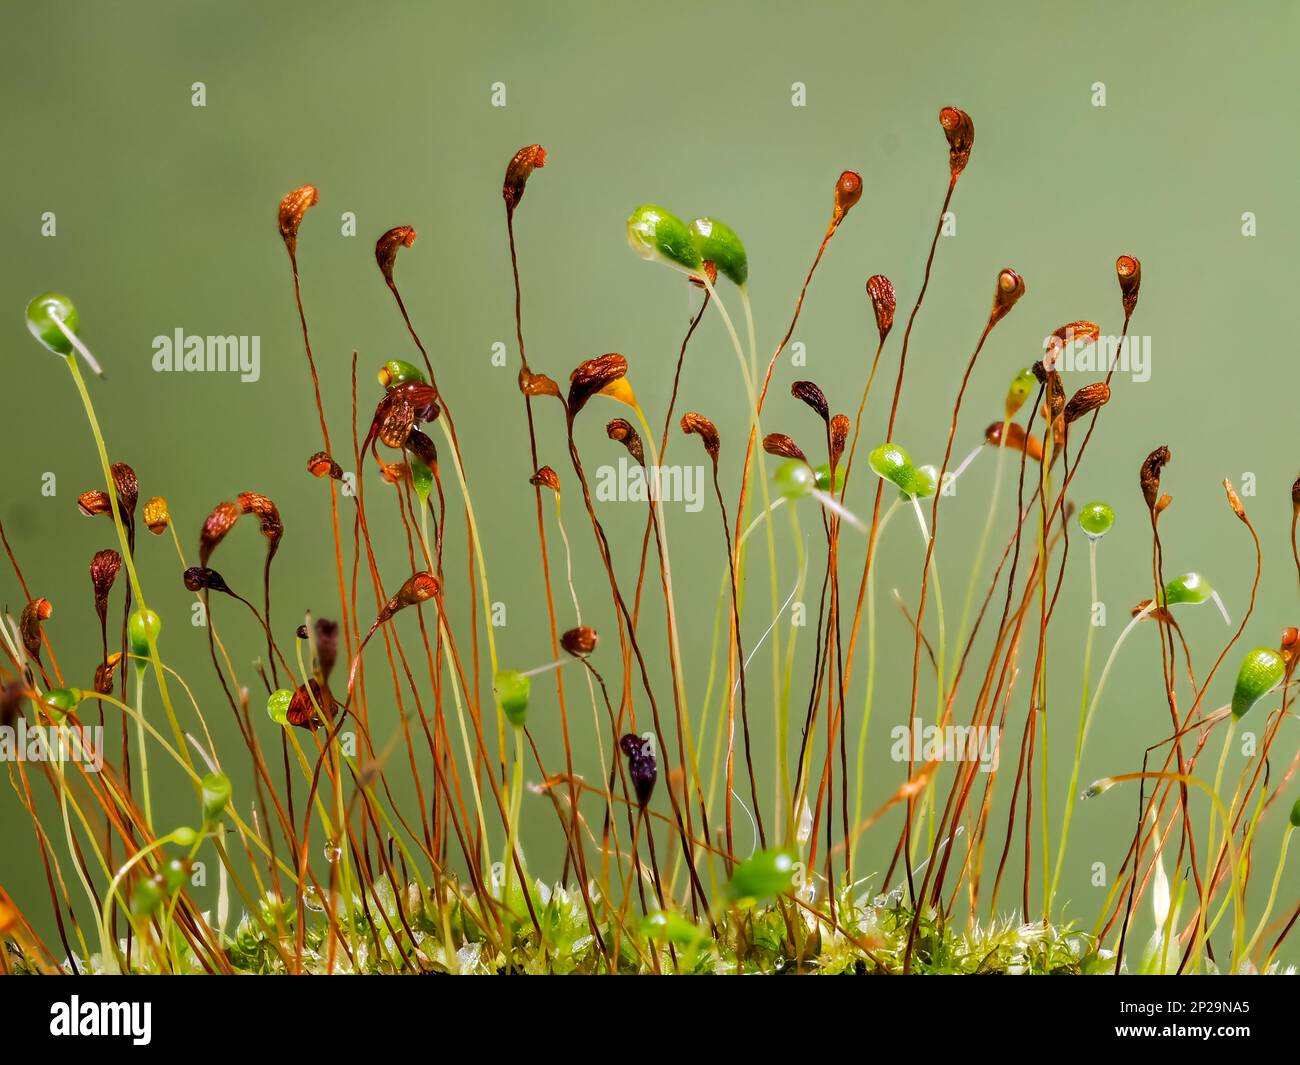 Seed heads of a moss plant photographed against a green background Stock Photo